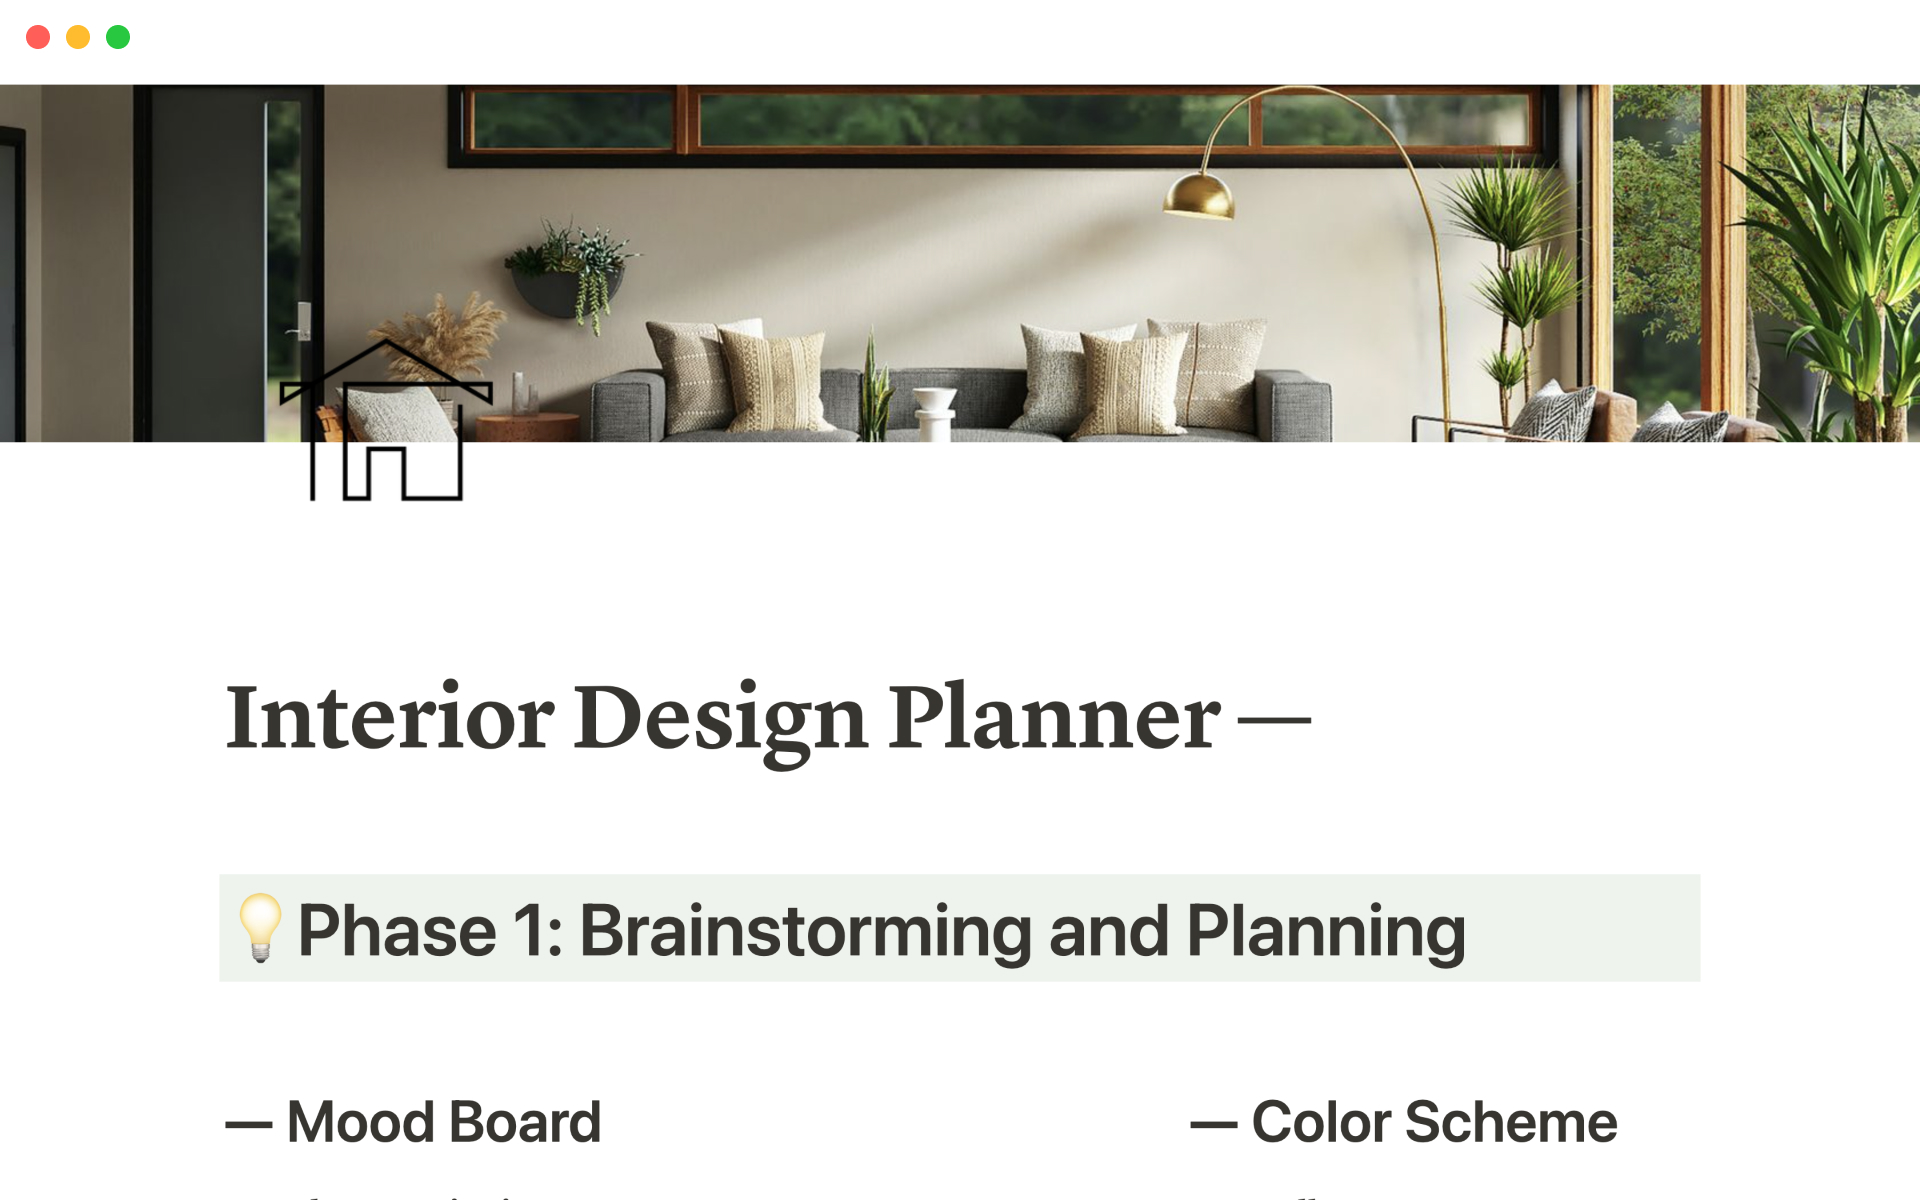 The ultimate interior design planner to suit all of your design and planning needs.